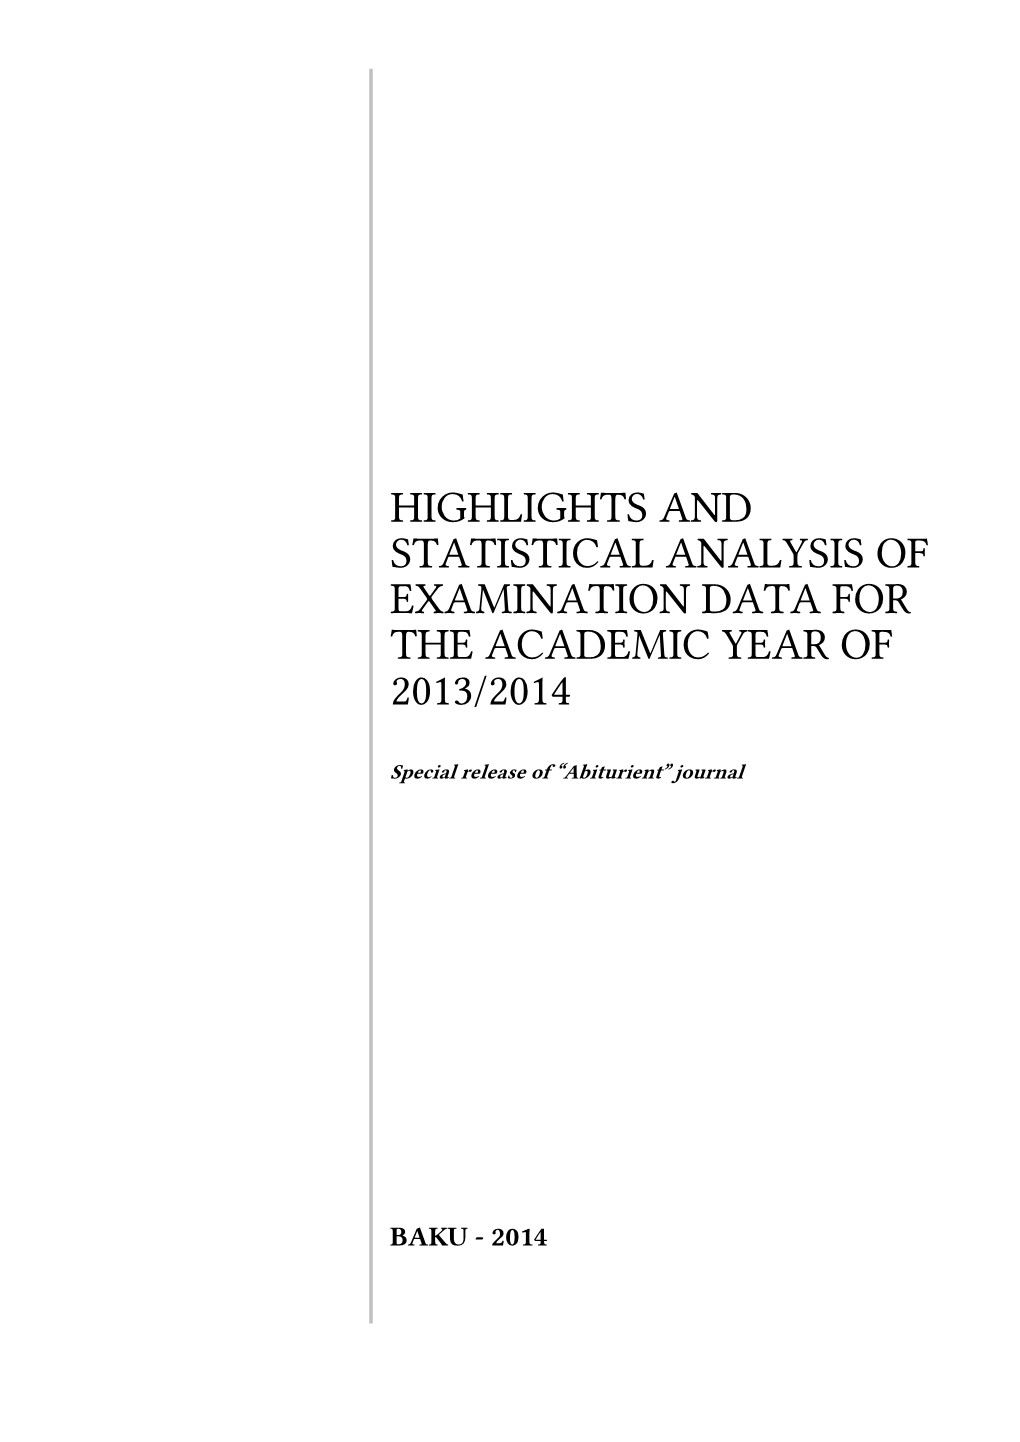 Highlights and Statistical Analysis of Examination Data for the Academic Year of 2013/2014